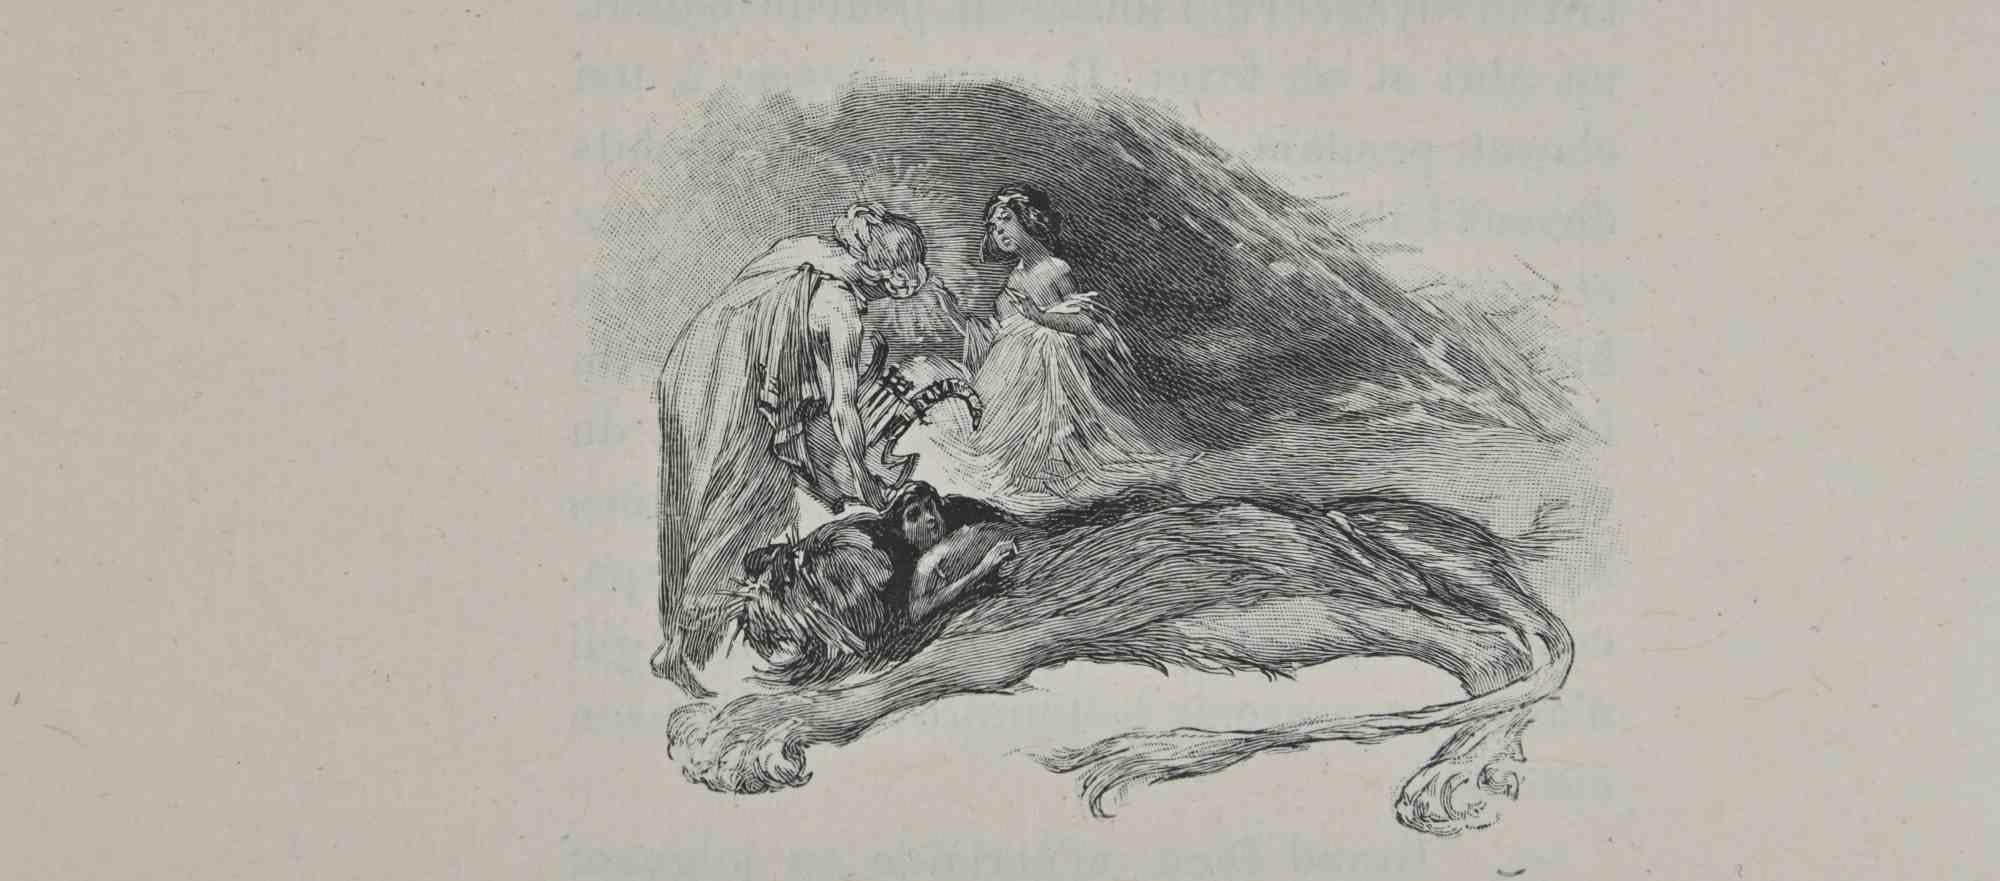 Petits Contes à ma Sœur is a Lithograph on paper realized by Hégésippe Moreau,  dated 1838.

The artwork  is in good condition.

Hégésippe Moreau (1810-1838) was a French lyric poet. The romantic myth was solidified by the publication of his